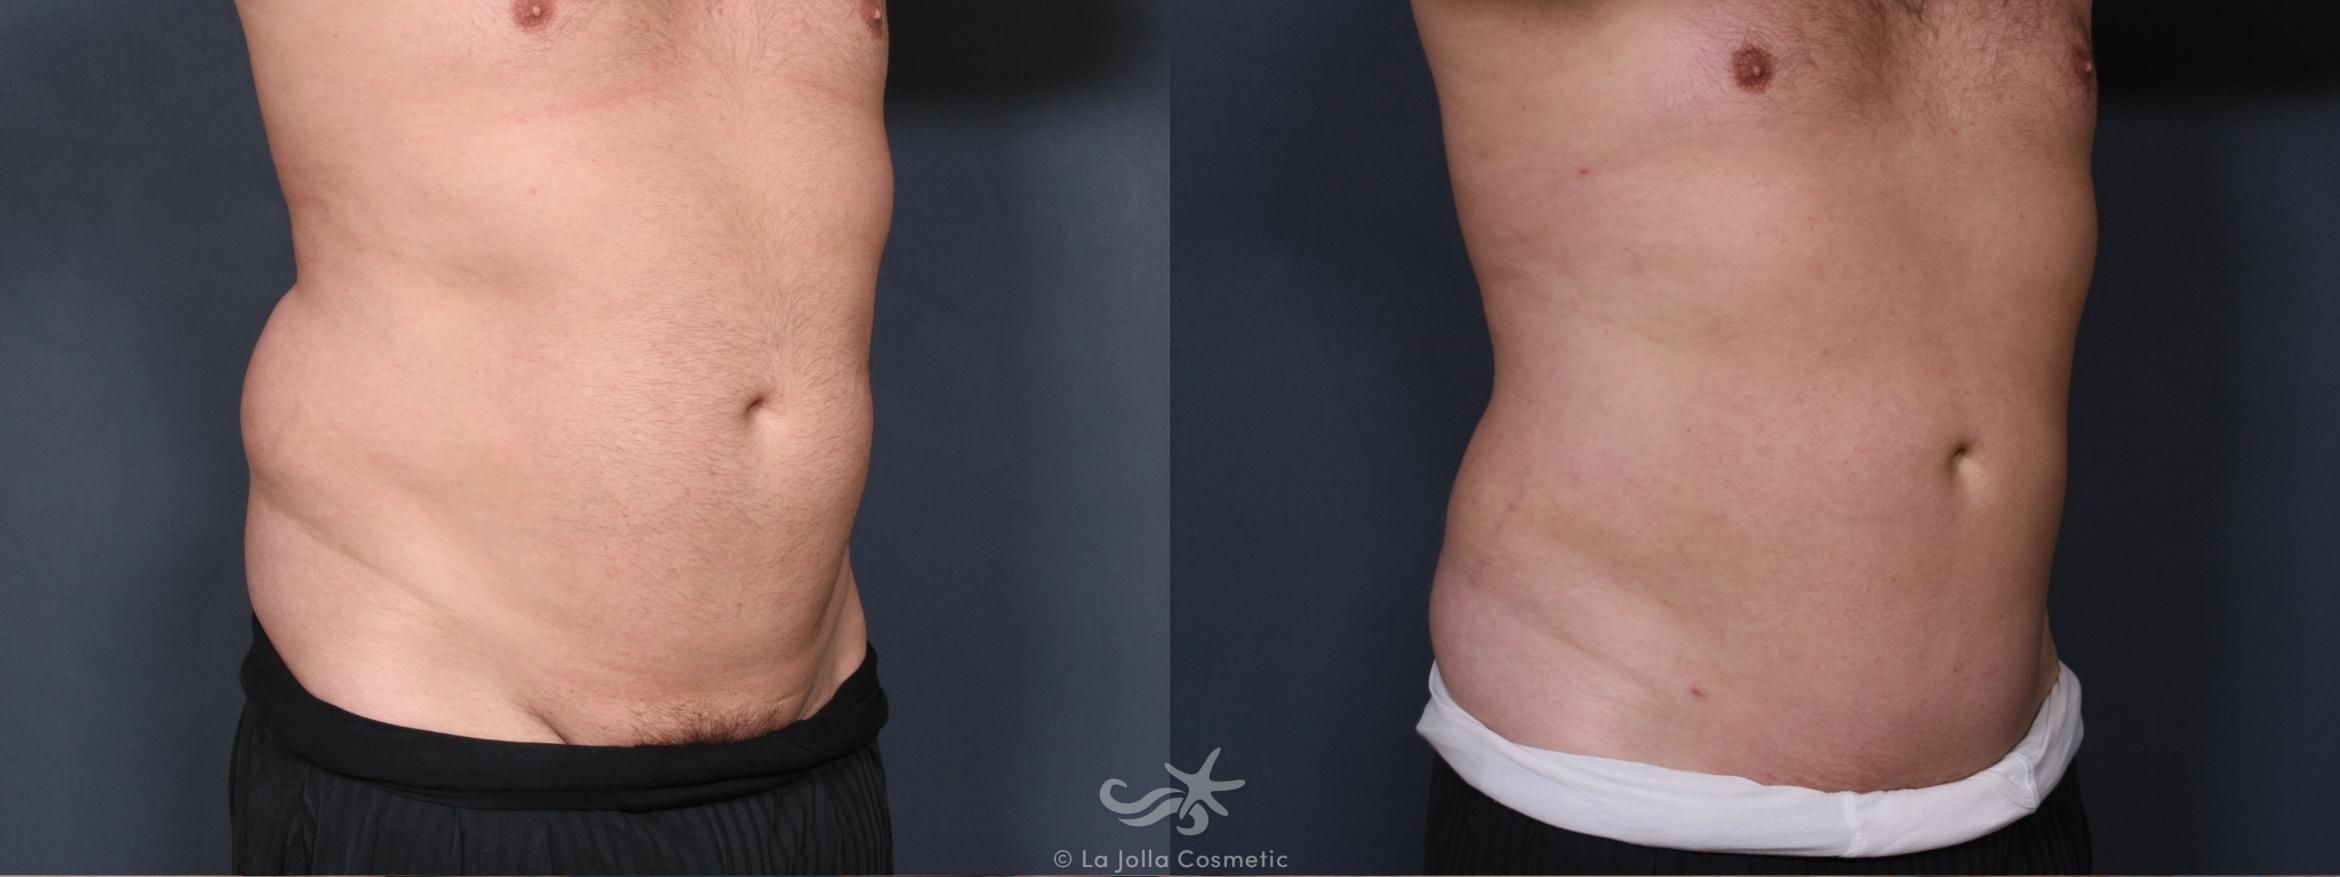 Before & After Male Liposuction Result 417 Right Oblique View in San Diego, CA